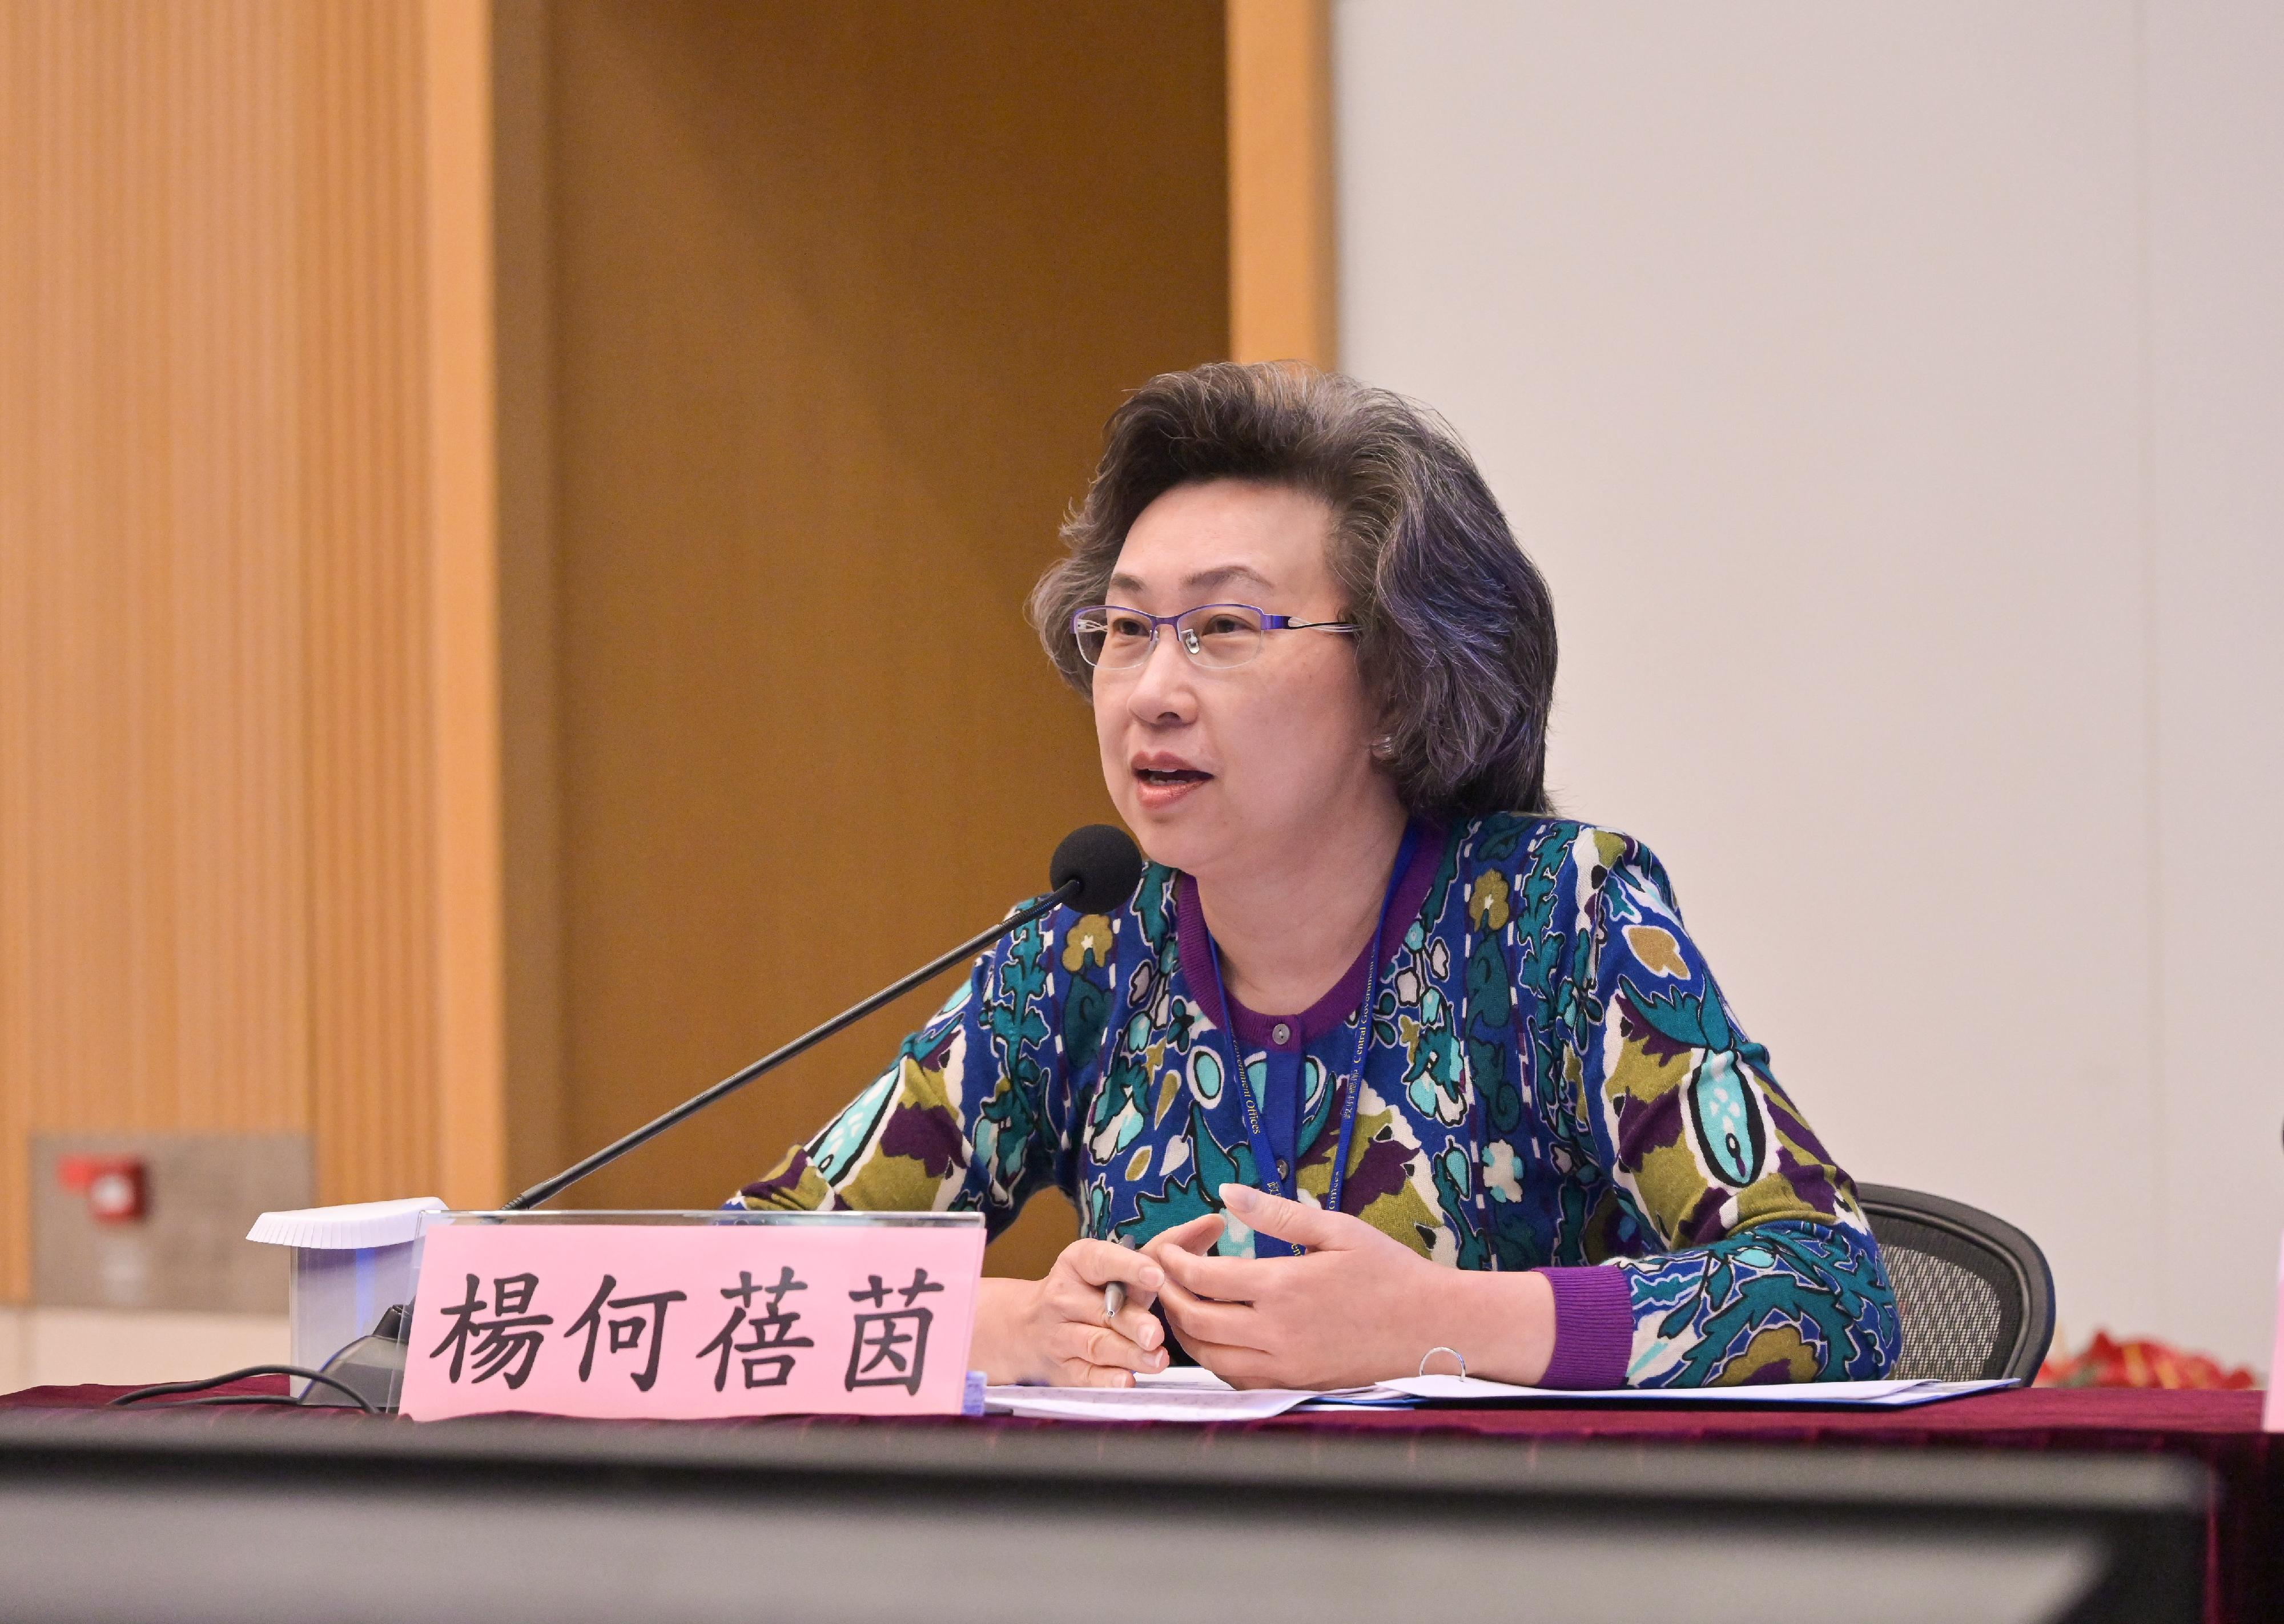 The Hong Kong Special Administrative Region Government today (April 9) held a seminar on learning the spirit of the "two sessions" at the Central Government Offices. Photo shows the Secretary for the Civil Service, Mrs Ingrid Yeung, sharing her views.